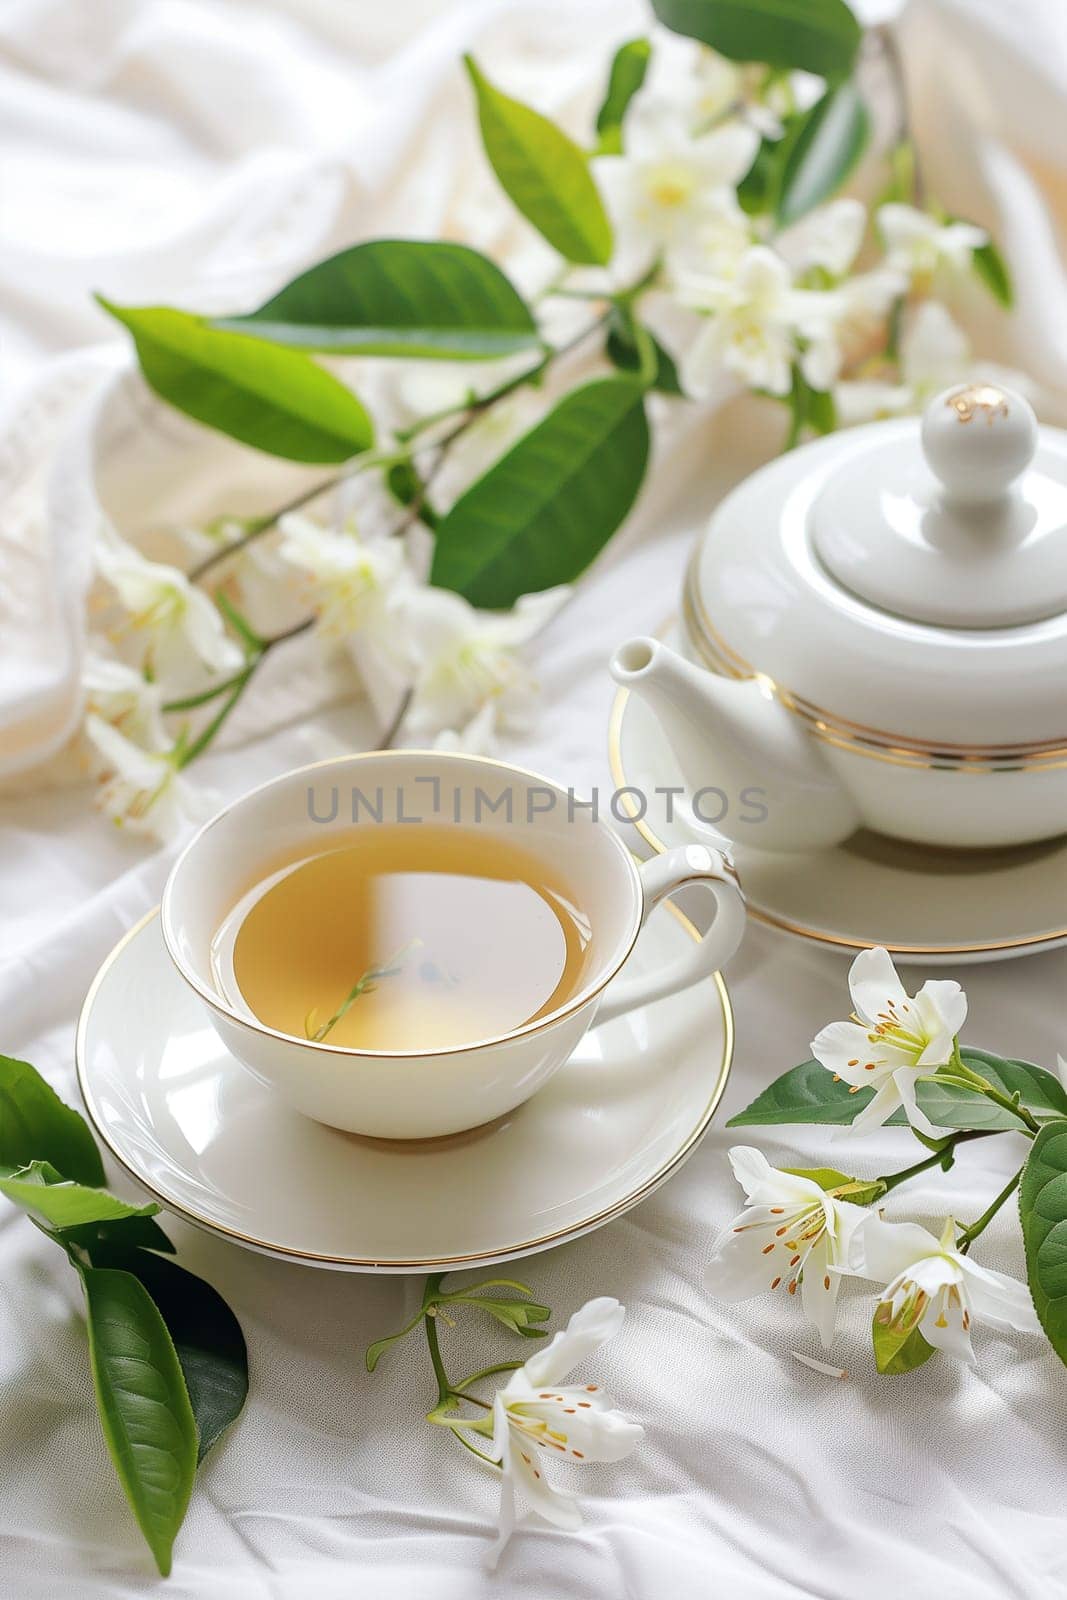 A cup filled with tea sits beside a teapot and saucer on a table, ready for pouring. The setting is simple and inviting.